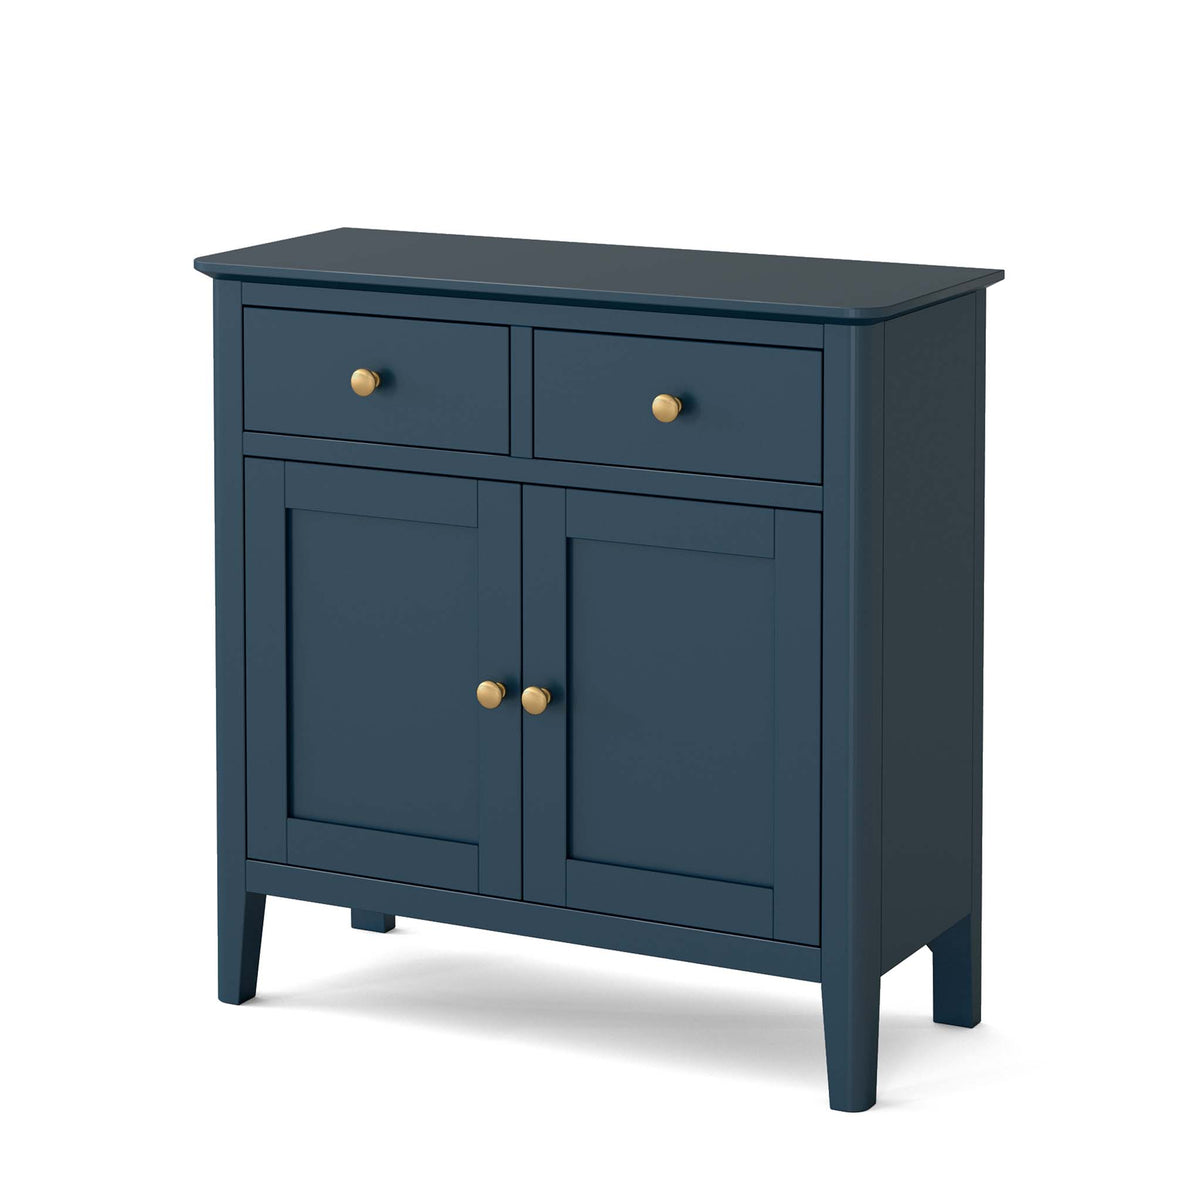 Stirling Blue Mini Sideboard with Drawers, Solid Pine Wood | Roseland ...